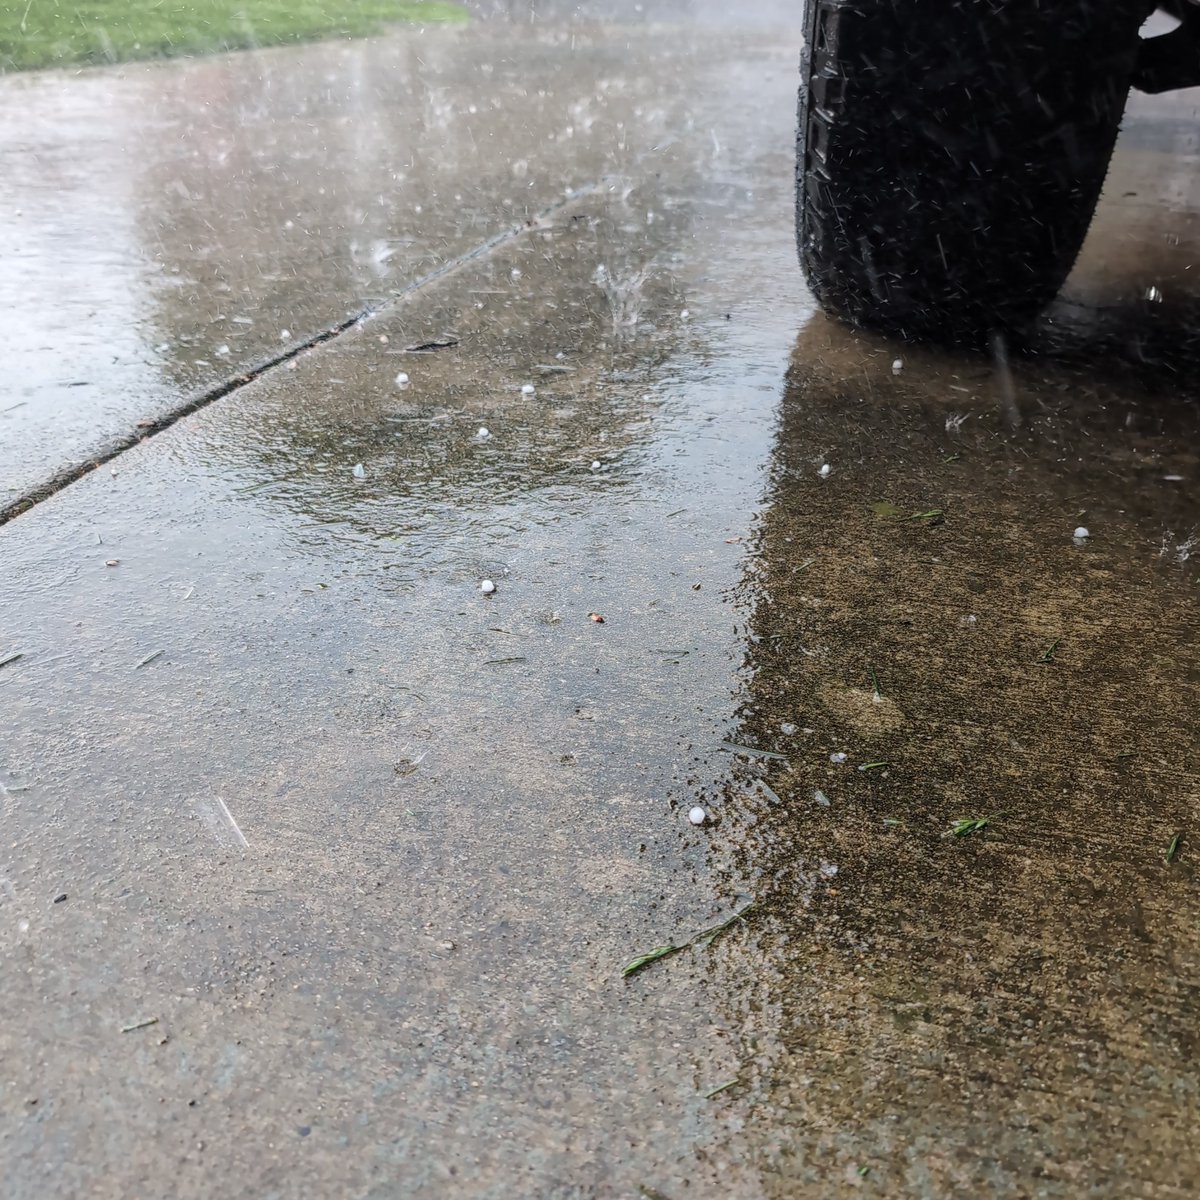 @NWSPaducah #spahspotter

Lots and lots of pea size hail on south east side of Evansville near Price Park. Going on for at least 5minuts. Still going down hard and getting larger